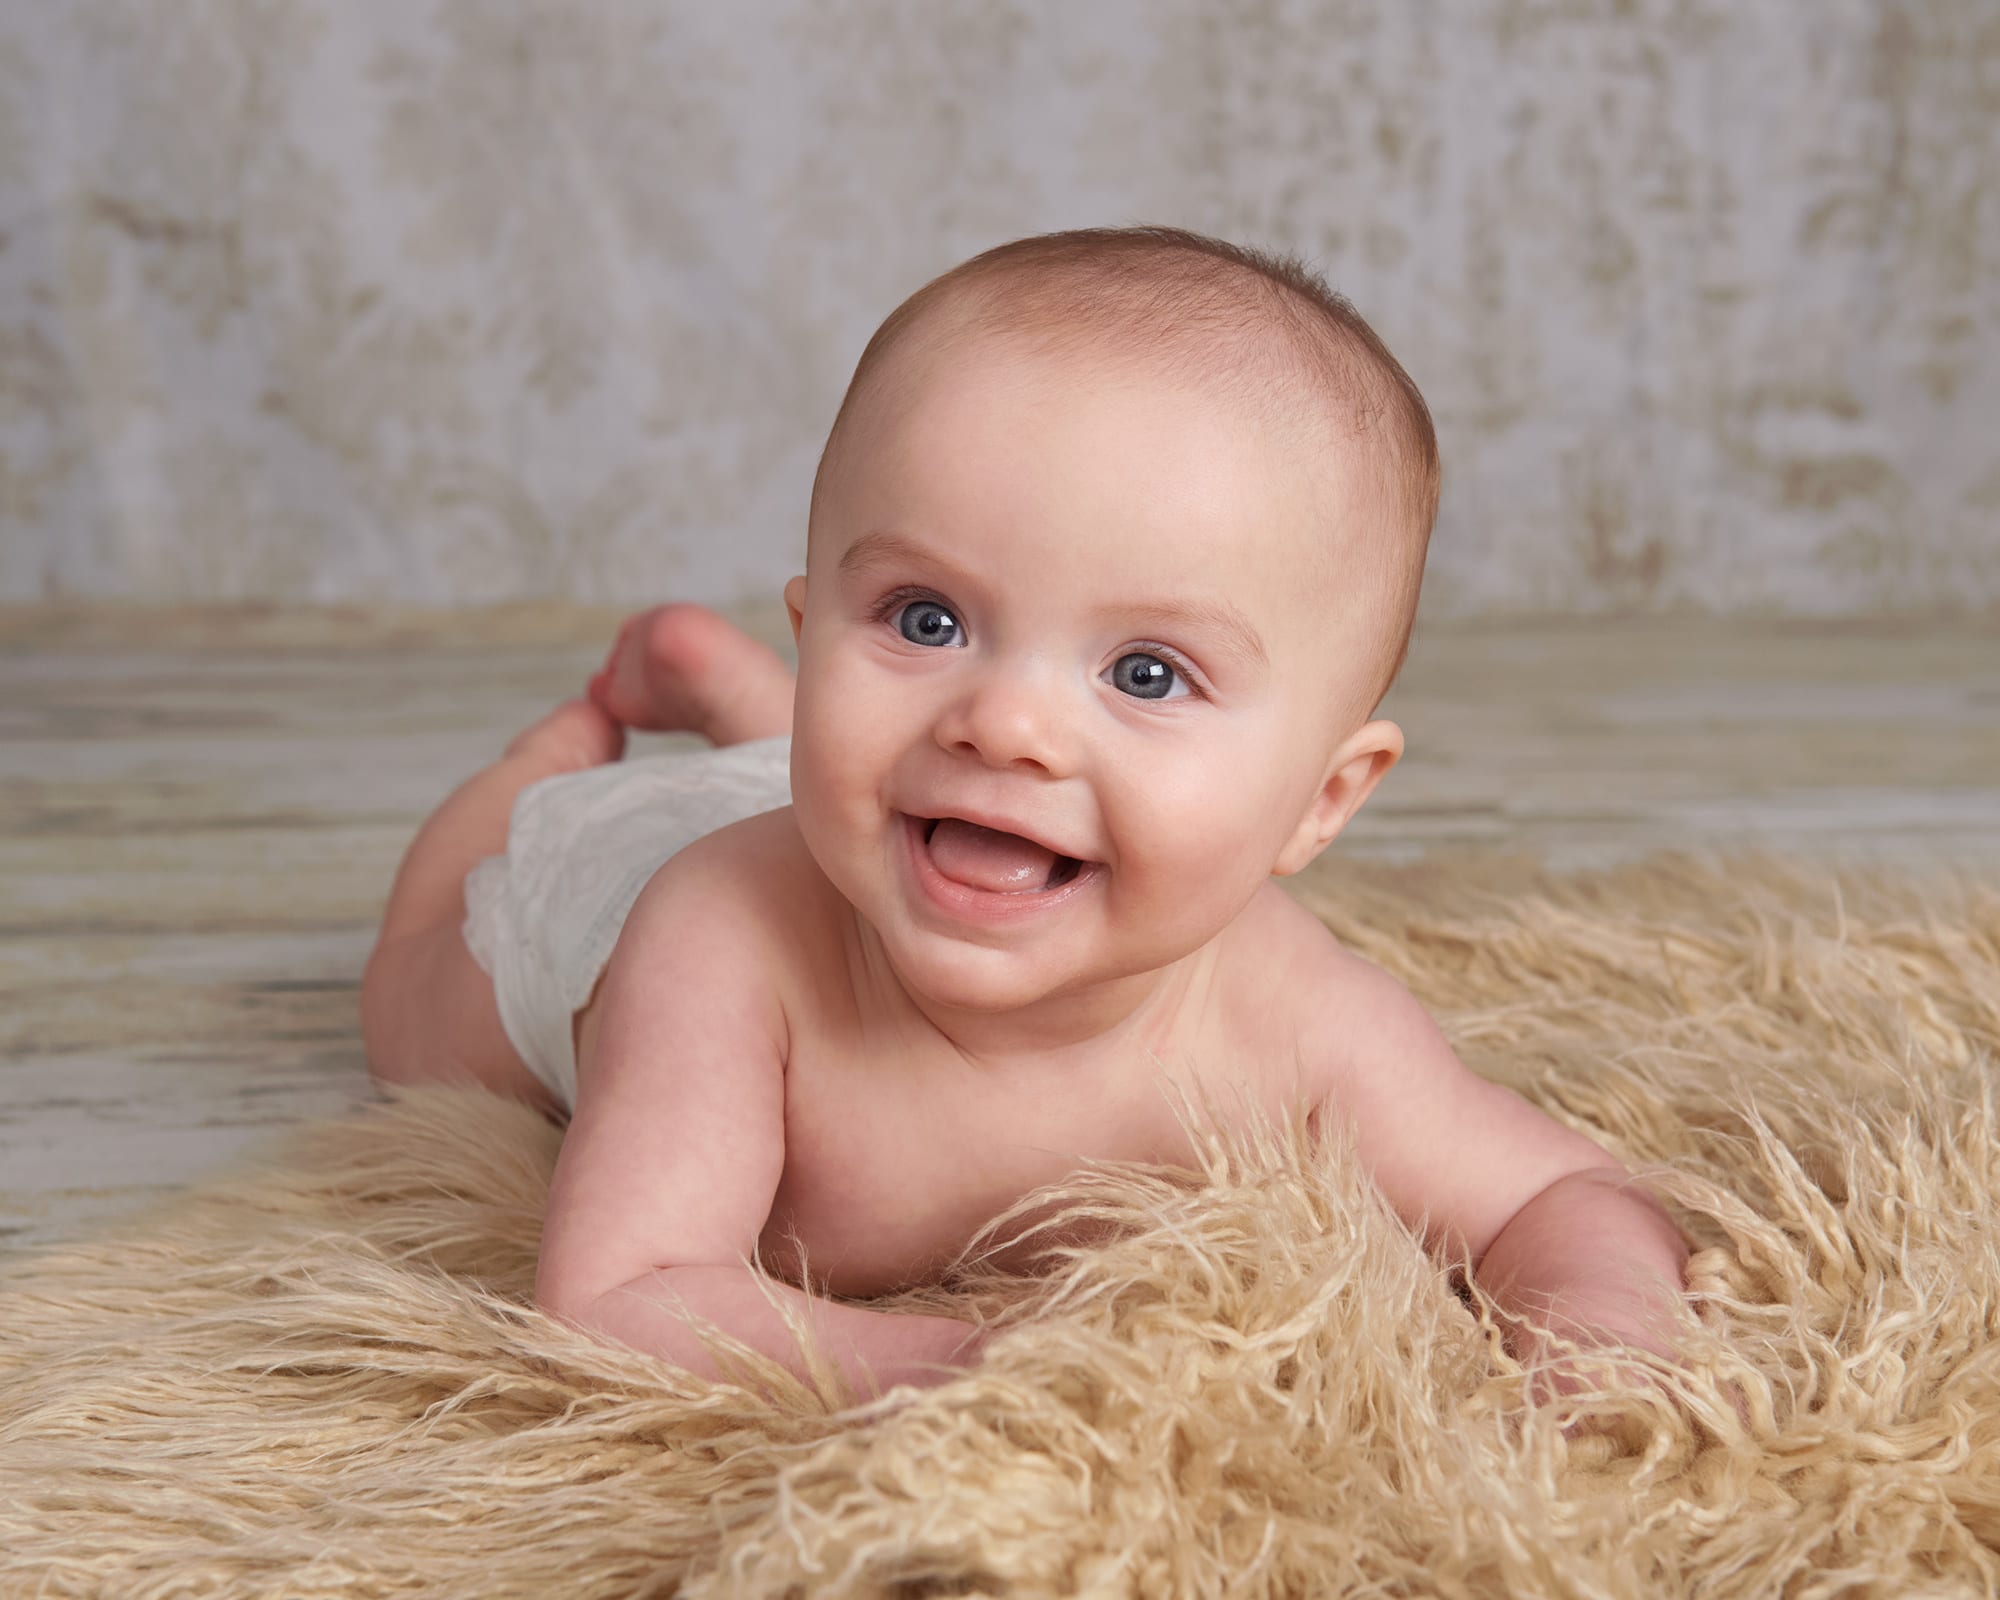 6 month old baby portrait